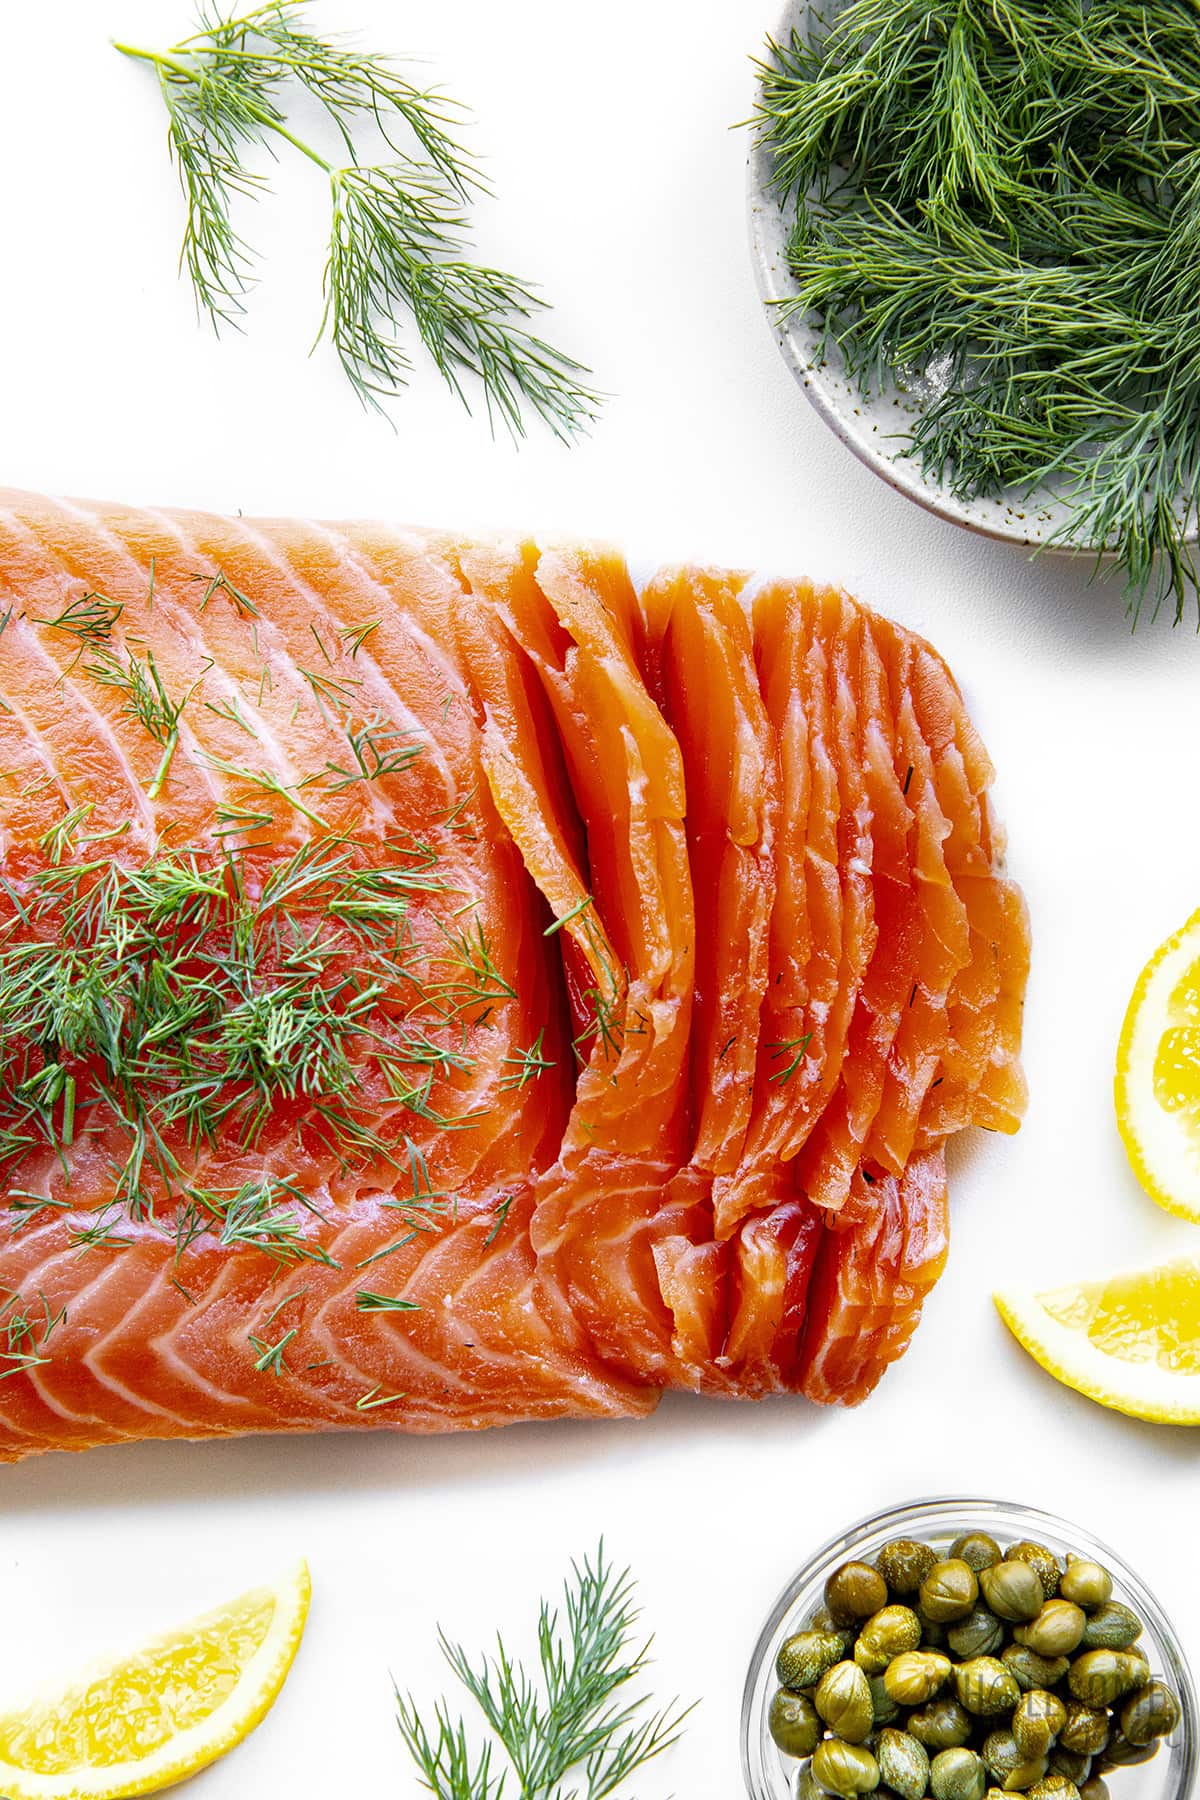 Salmon lox cut into thin strips next to fresh dill and lemon wedges.